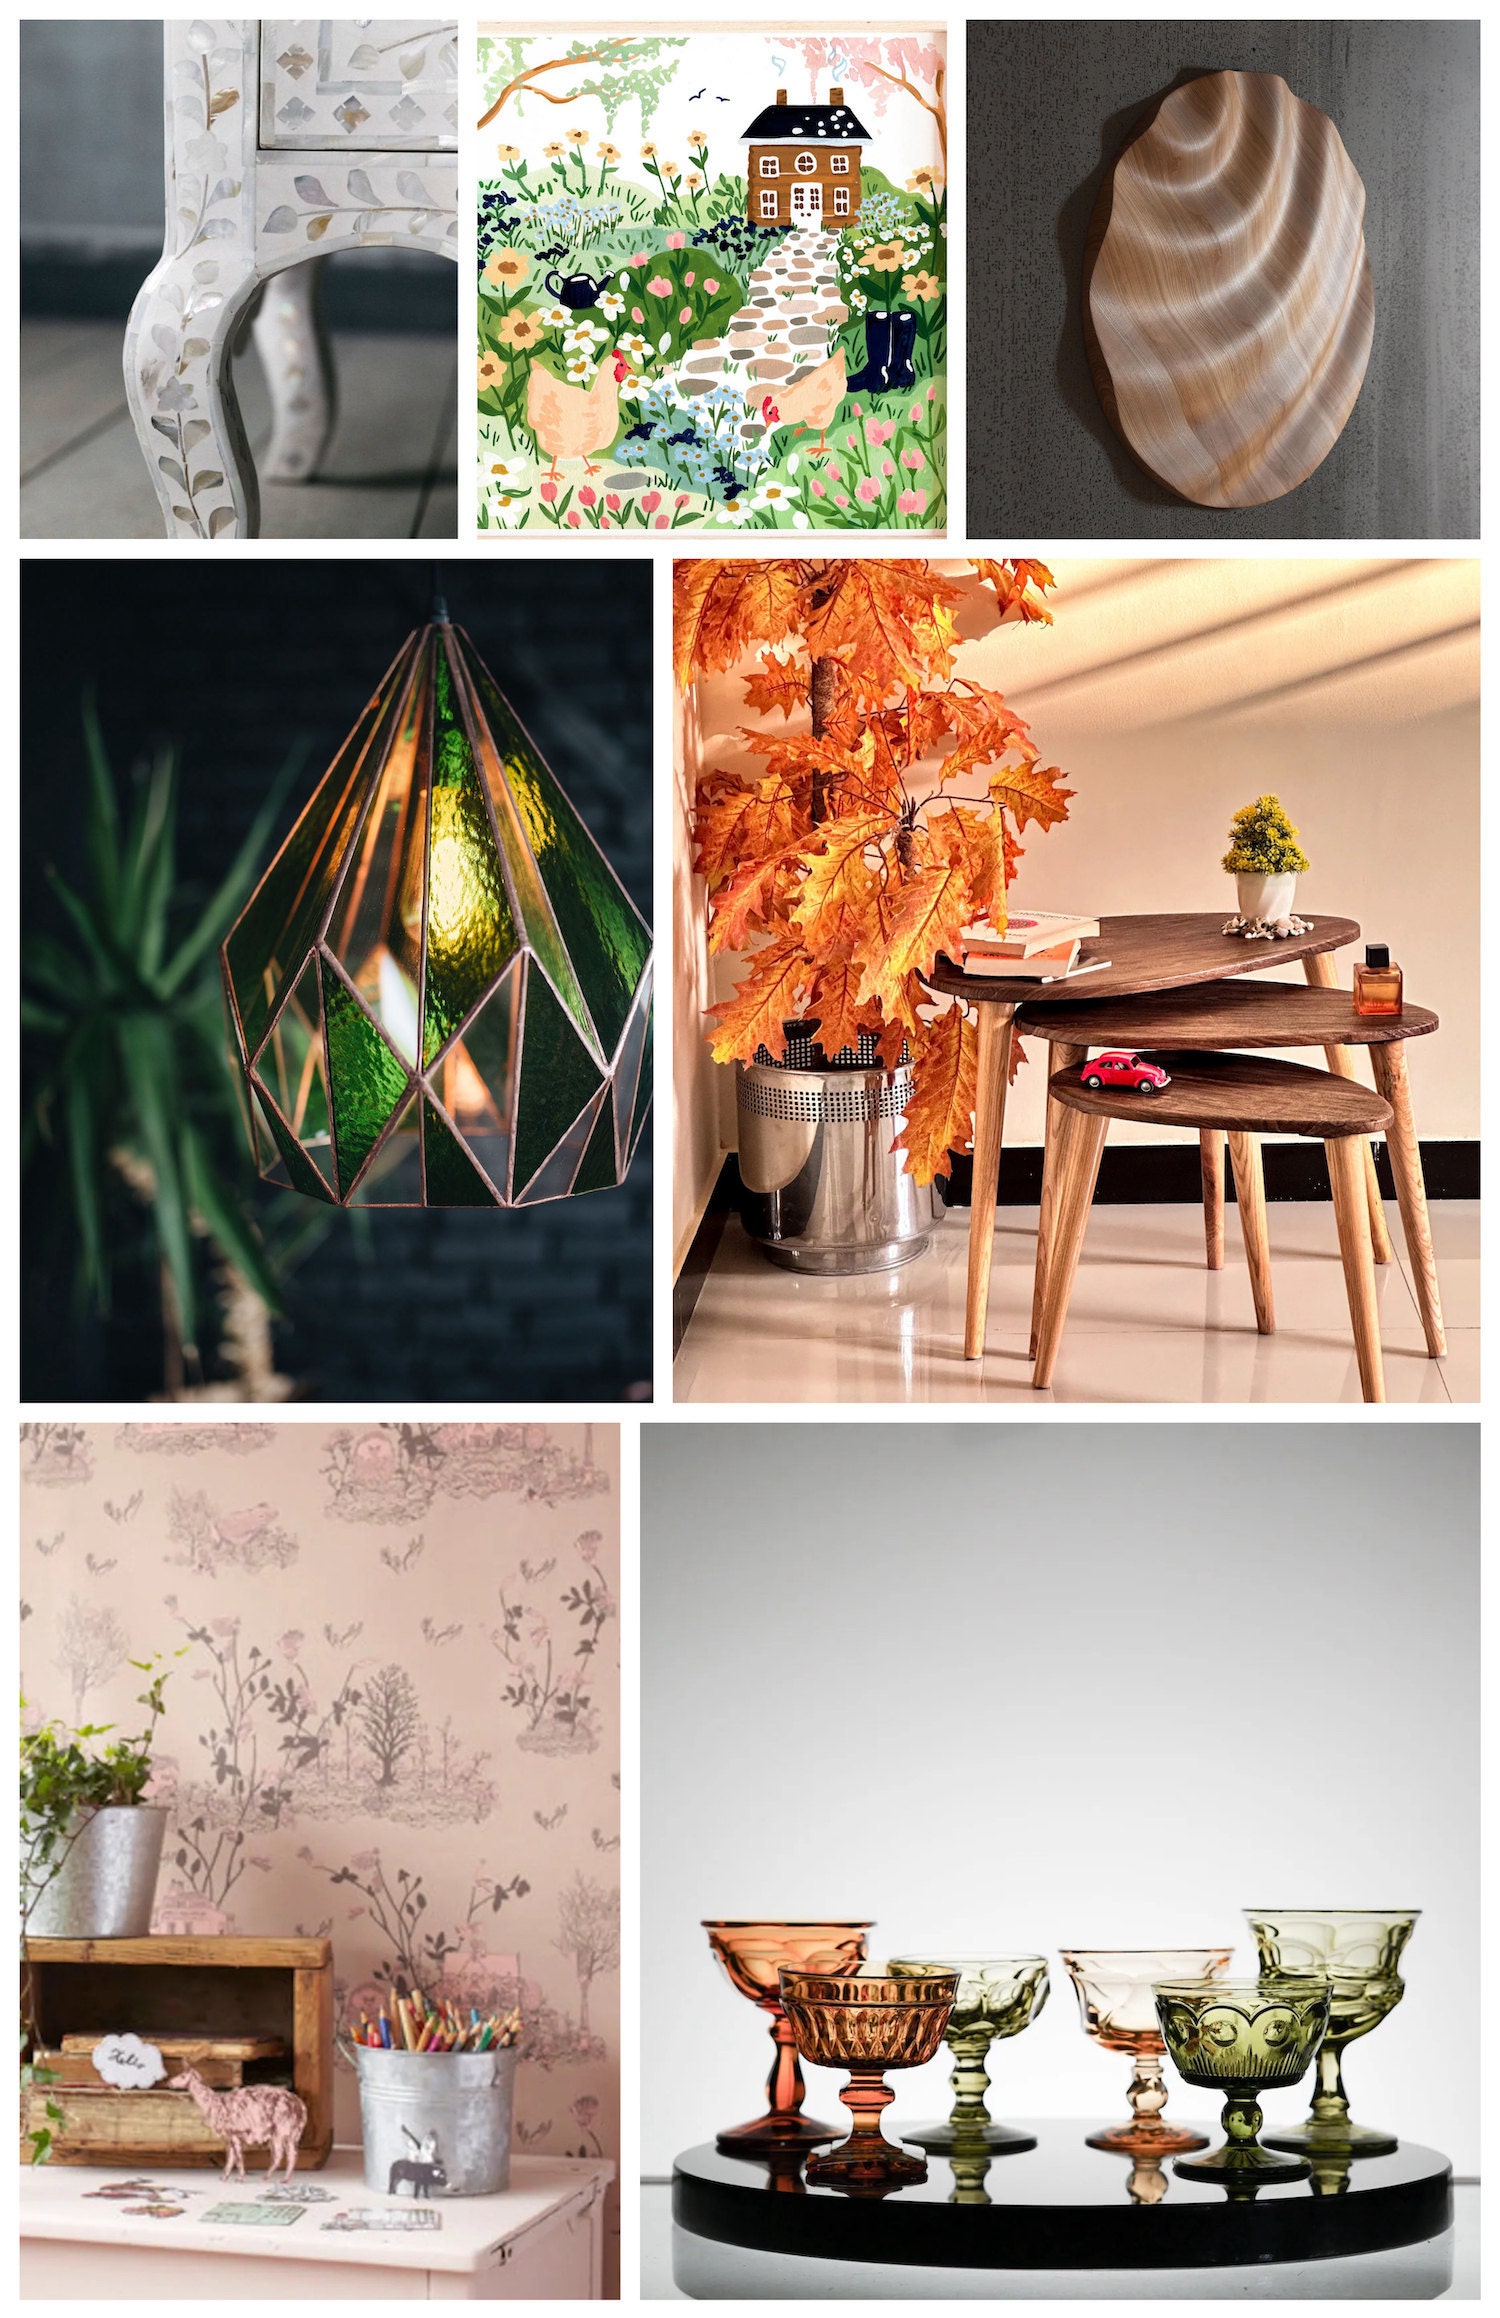 My March Mood Board - Moody Mood Board - Eclectic Trends